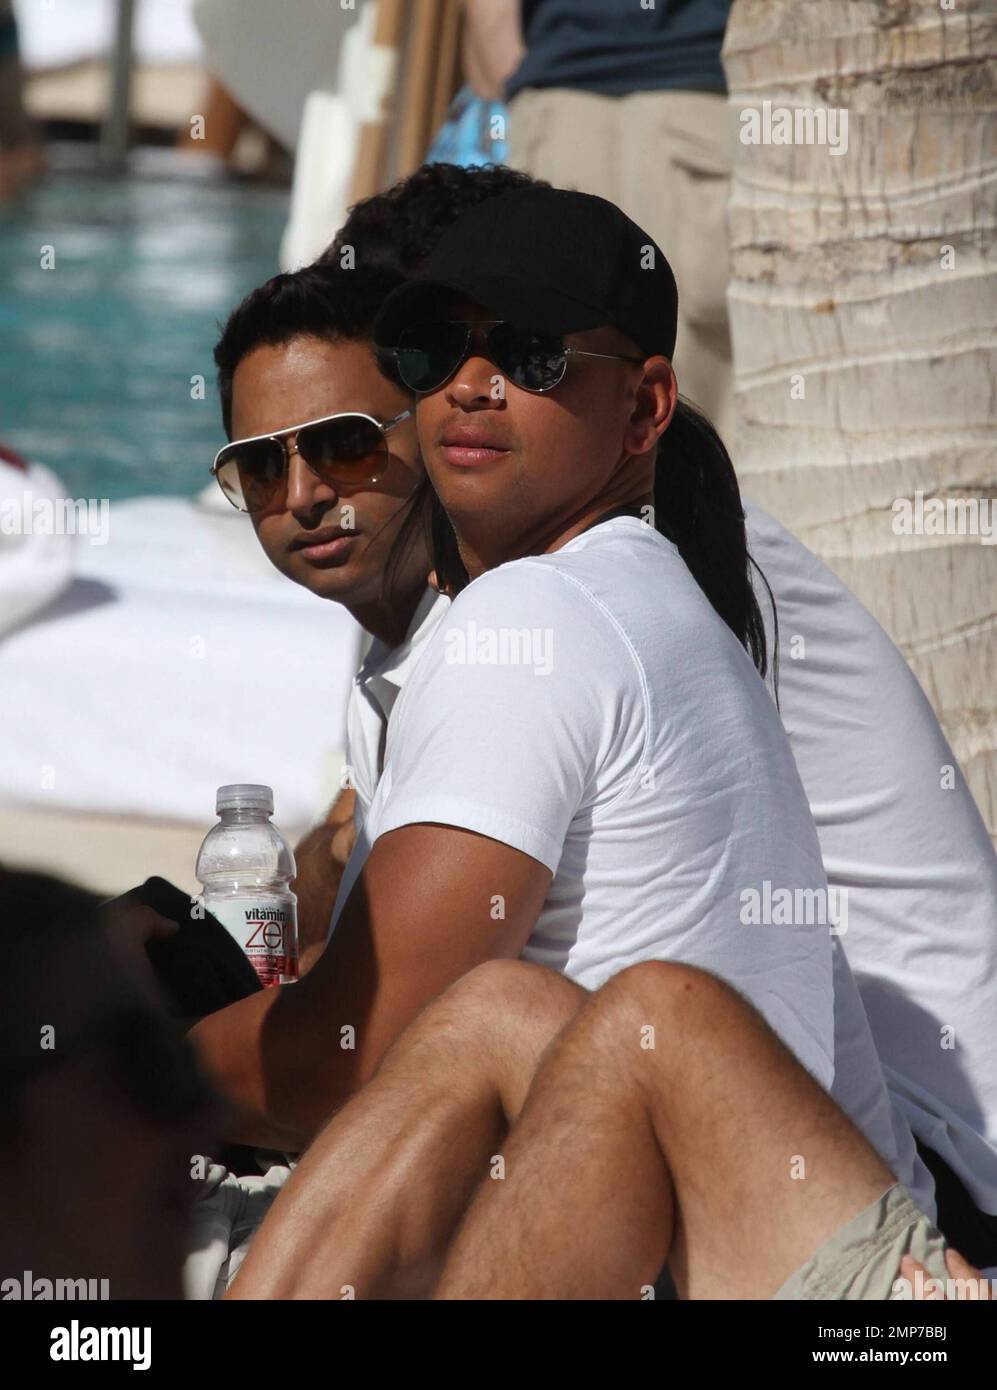 Alex Rodriguez enjoys an afternoon of drinks and female attention at the W hotel pool in South Beach.  Earlier in the day Rodriguez attended the Direct TV Celebrity Beach Bowl with his manager Guy Oseary.  Miami, FL 2/6/2010 Stock Photo